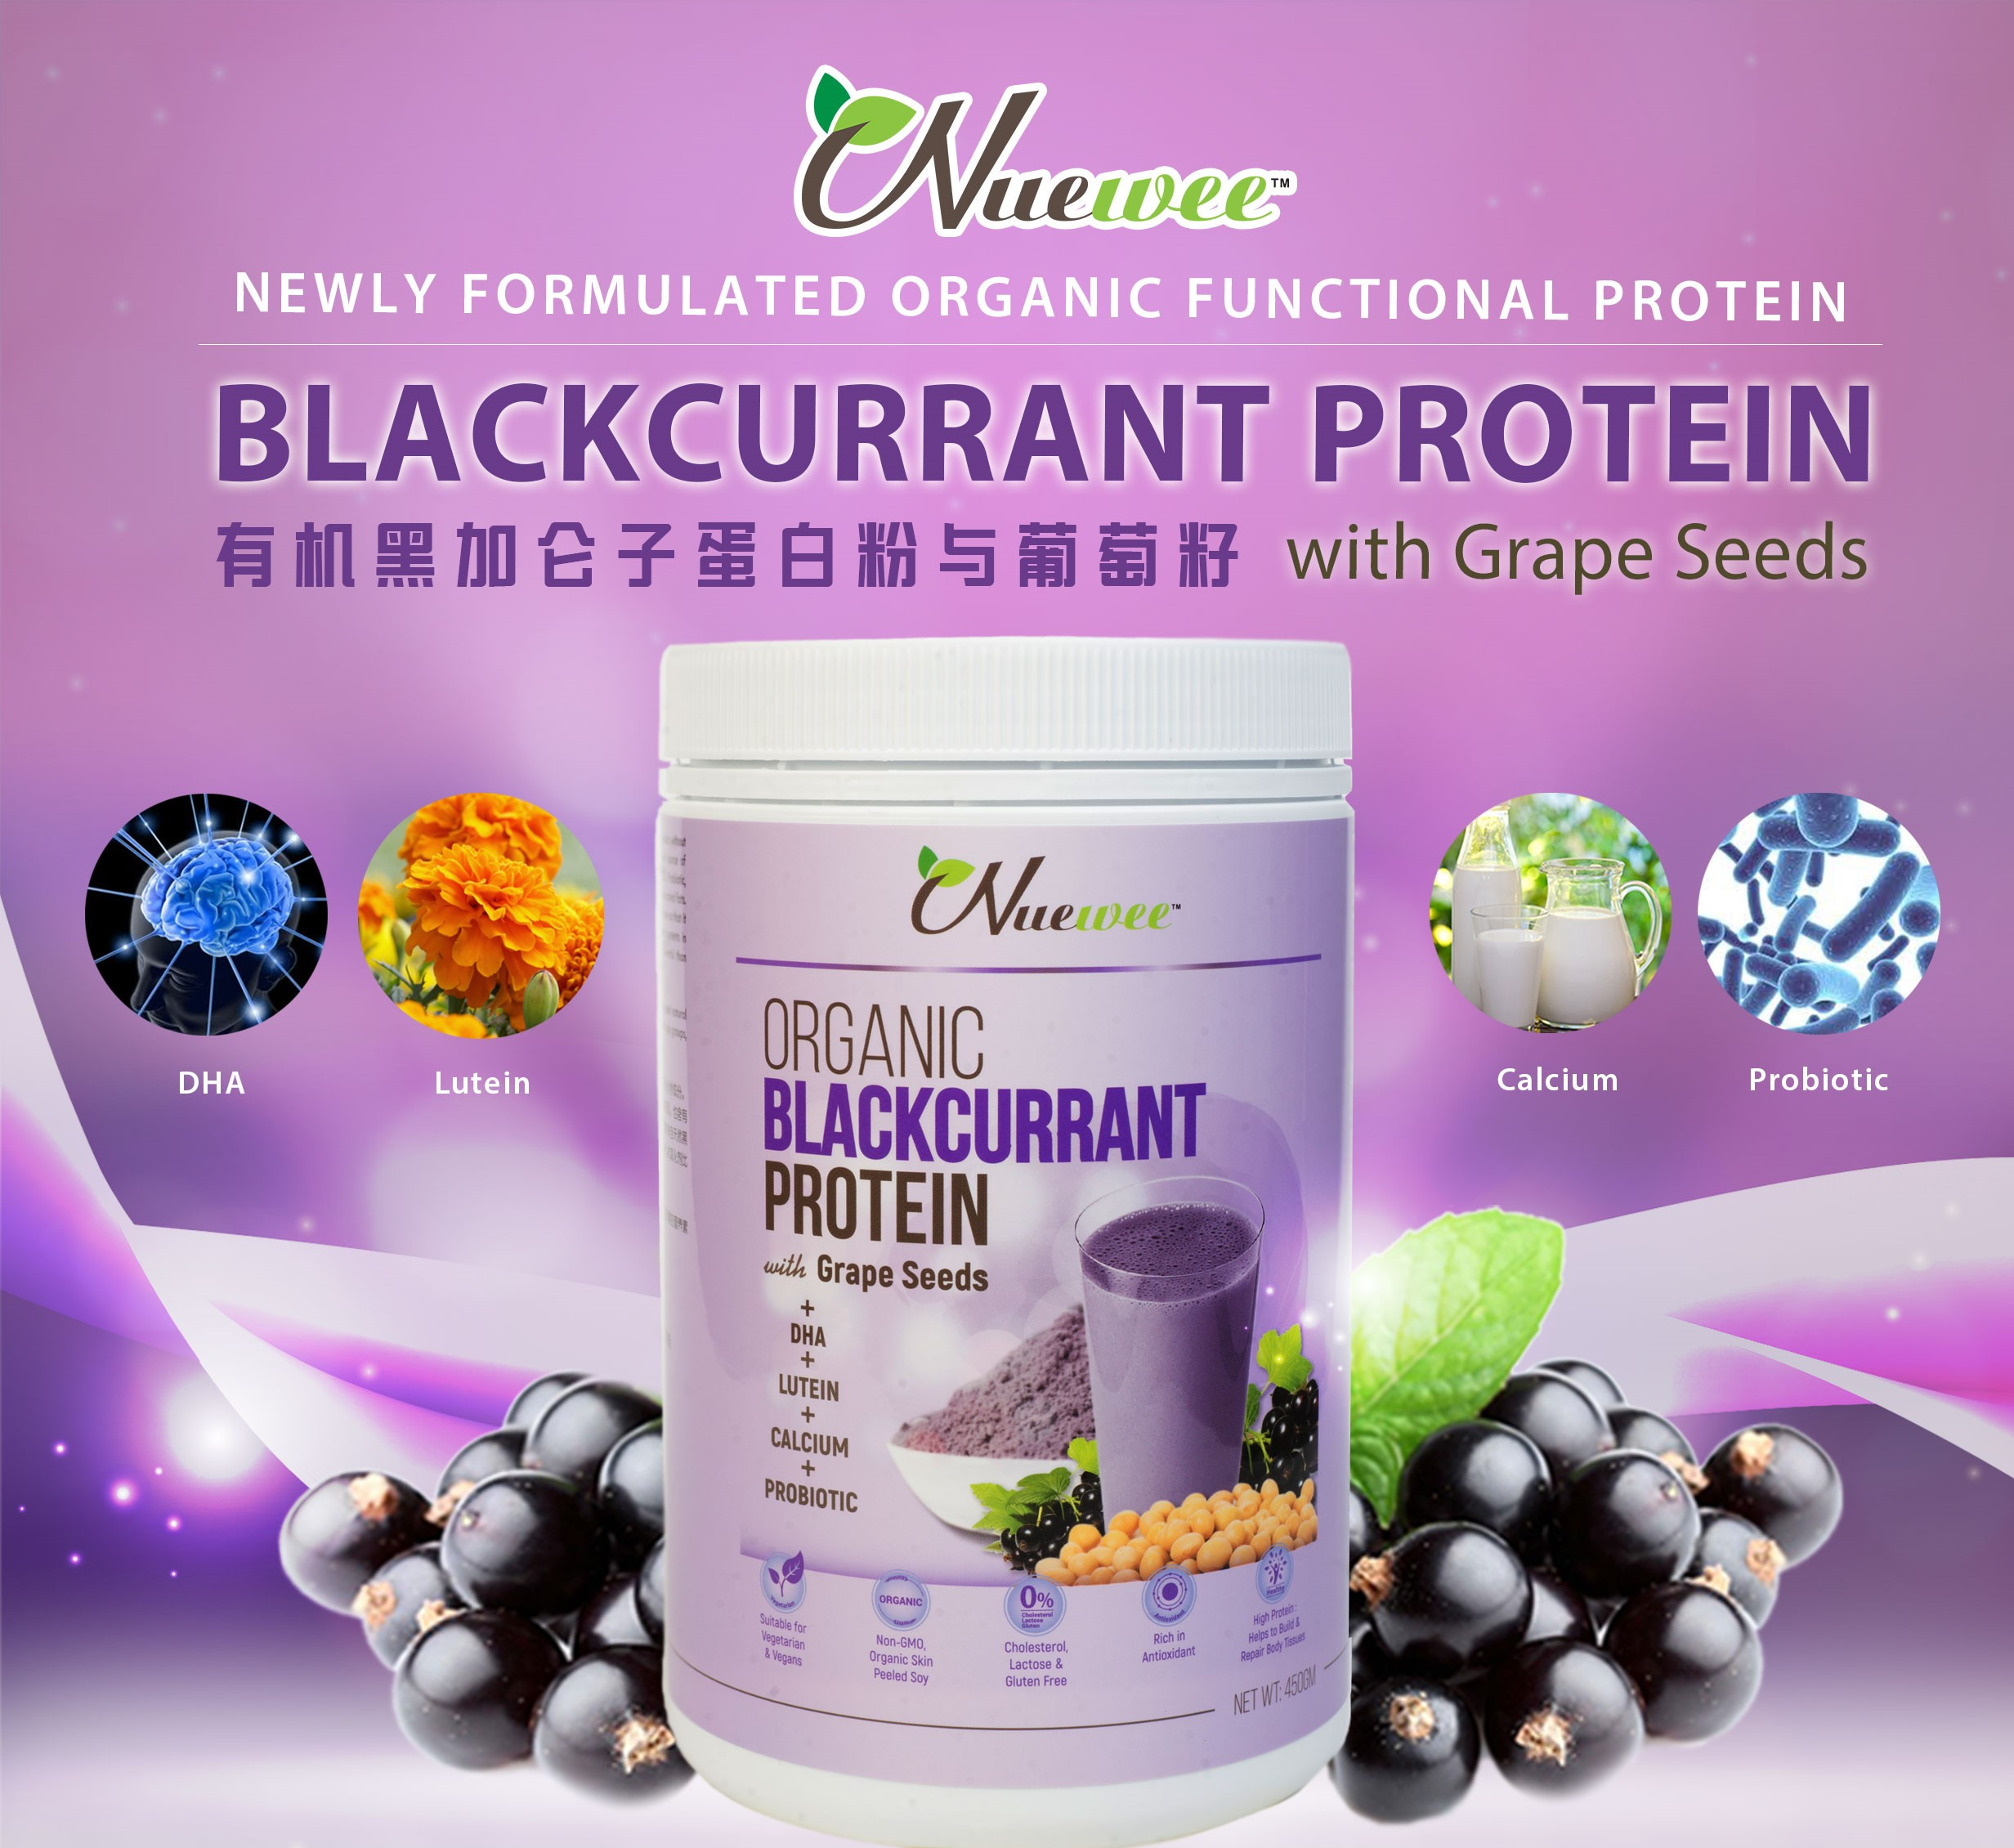 Nuewee-Organic-Blackcurrant-Protein-with-Grape-seeds.jpg